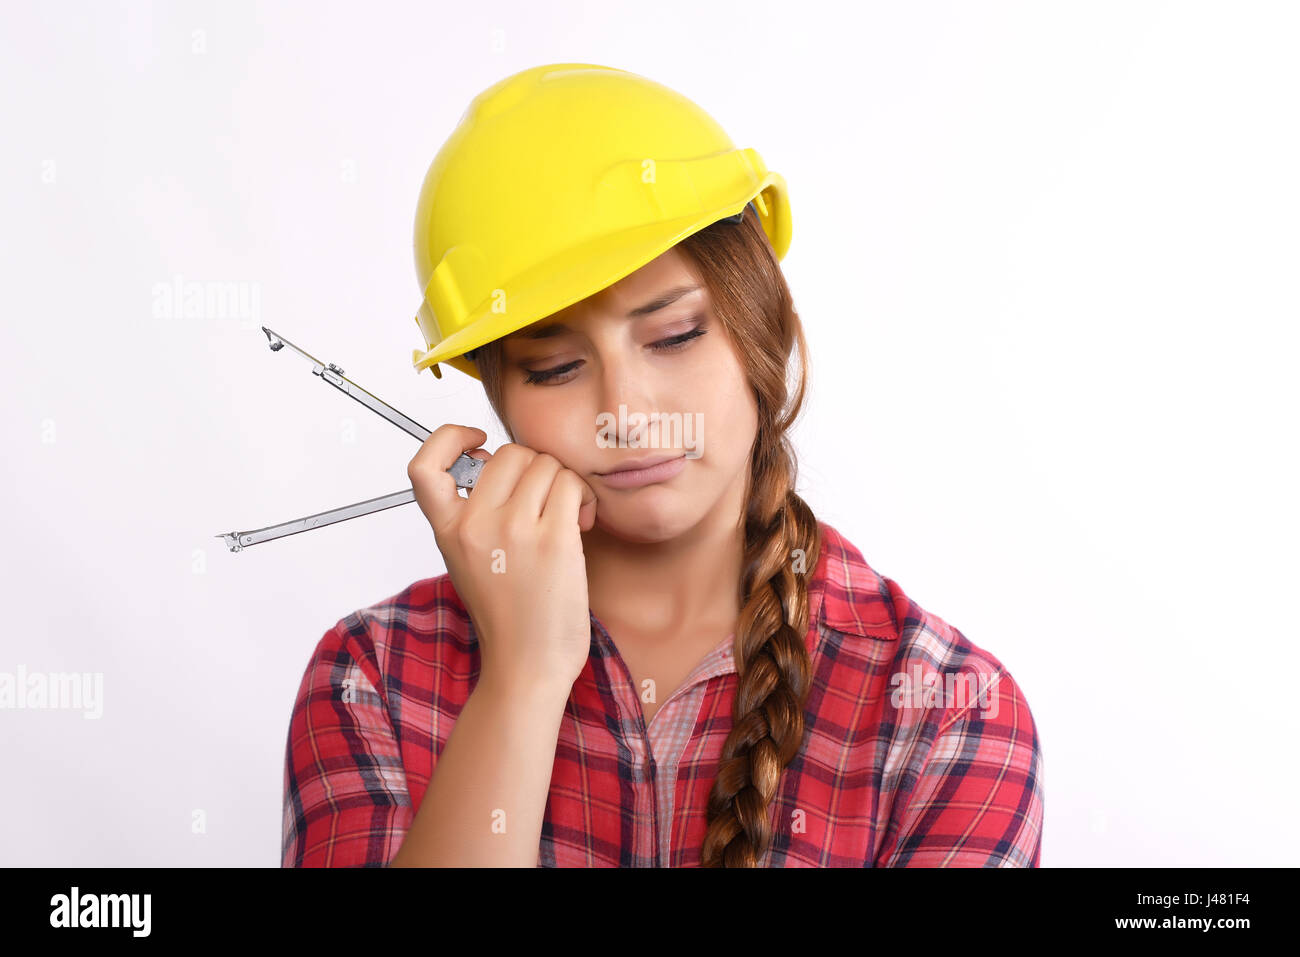 Close up of beautiful woman construction worker thinking with compass and construction helmet. Isolated white background. Stock Photo